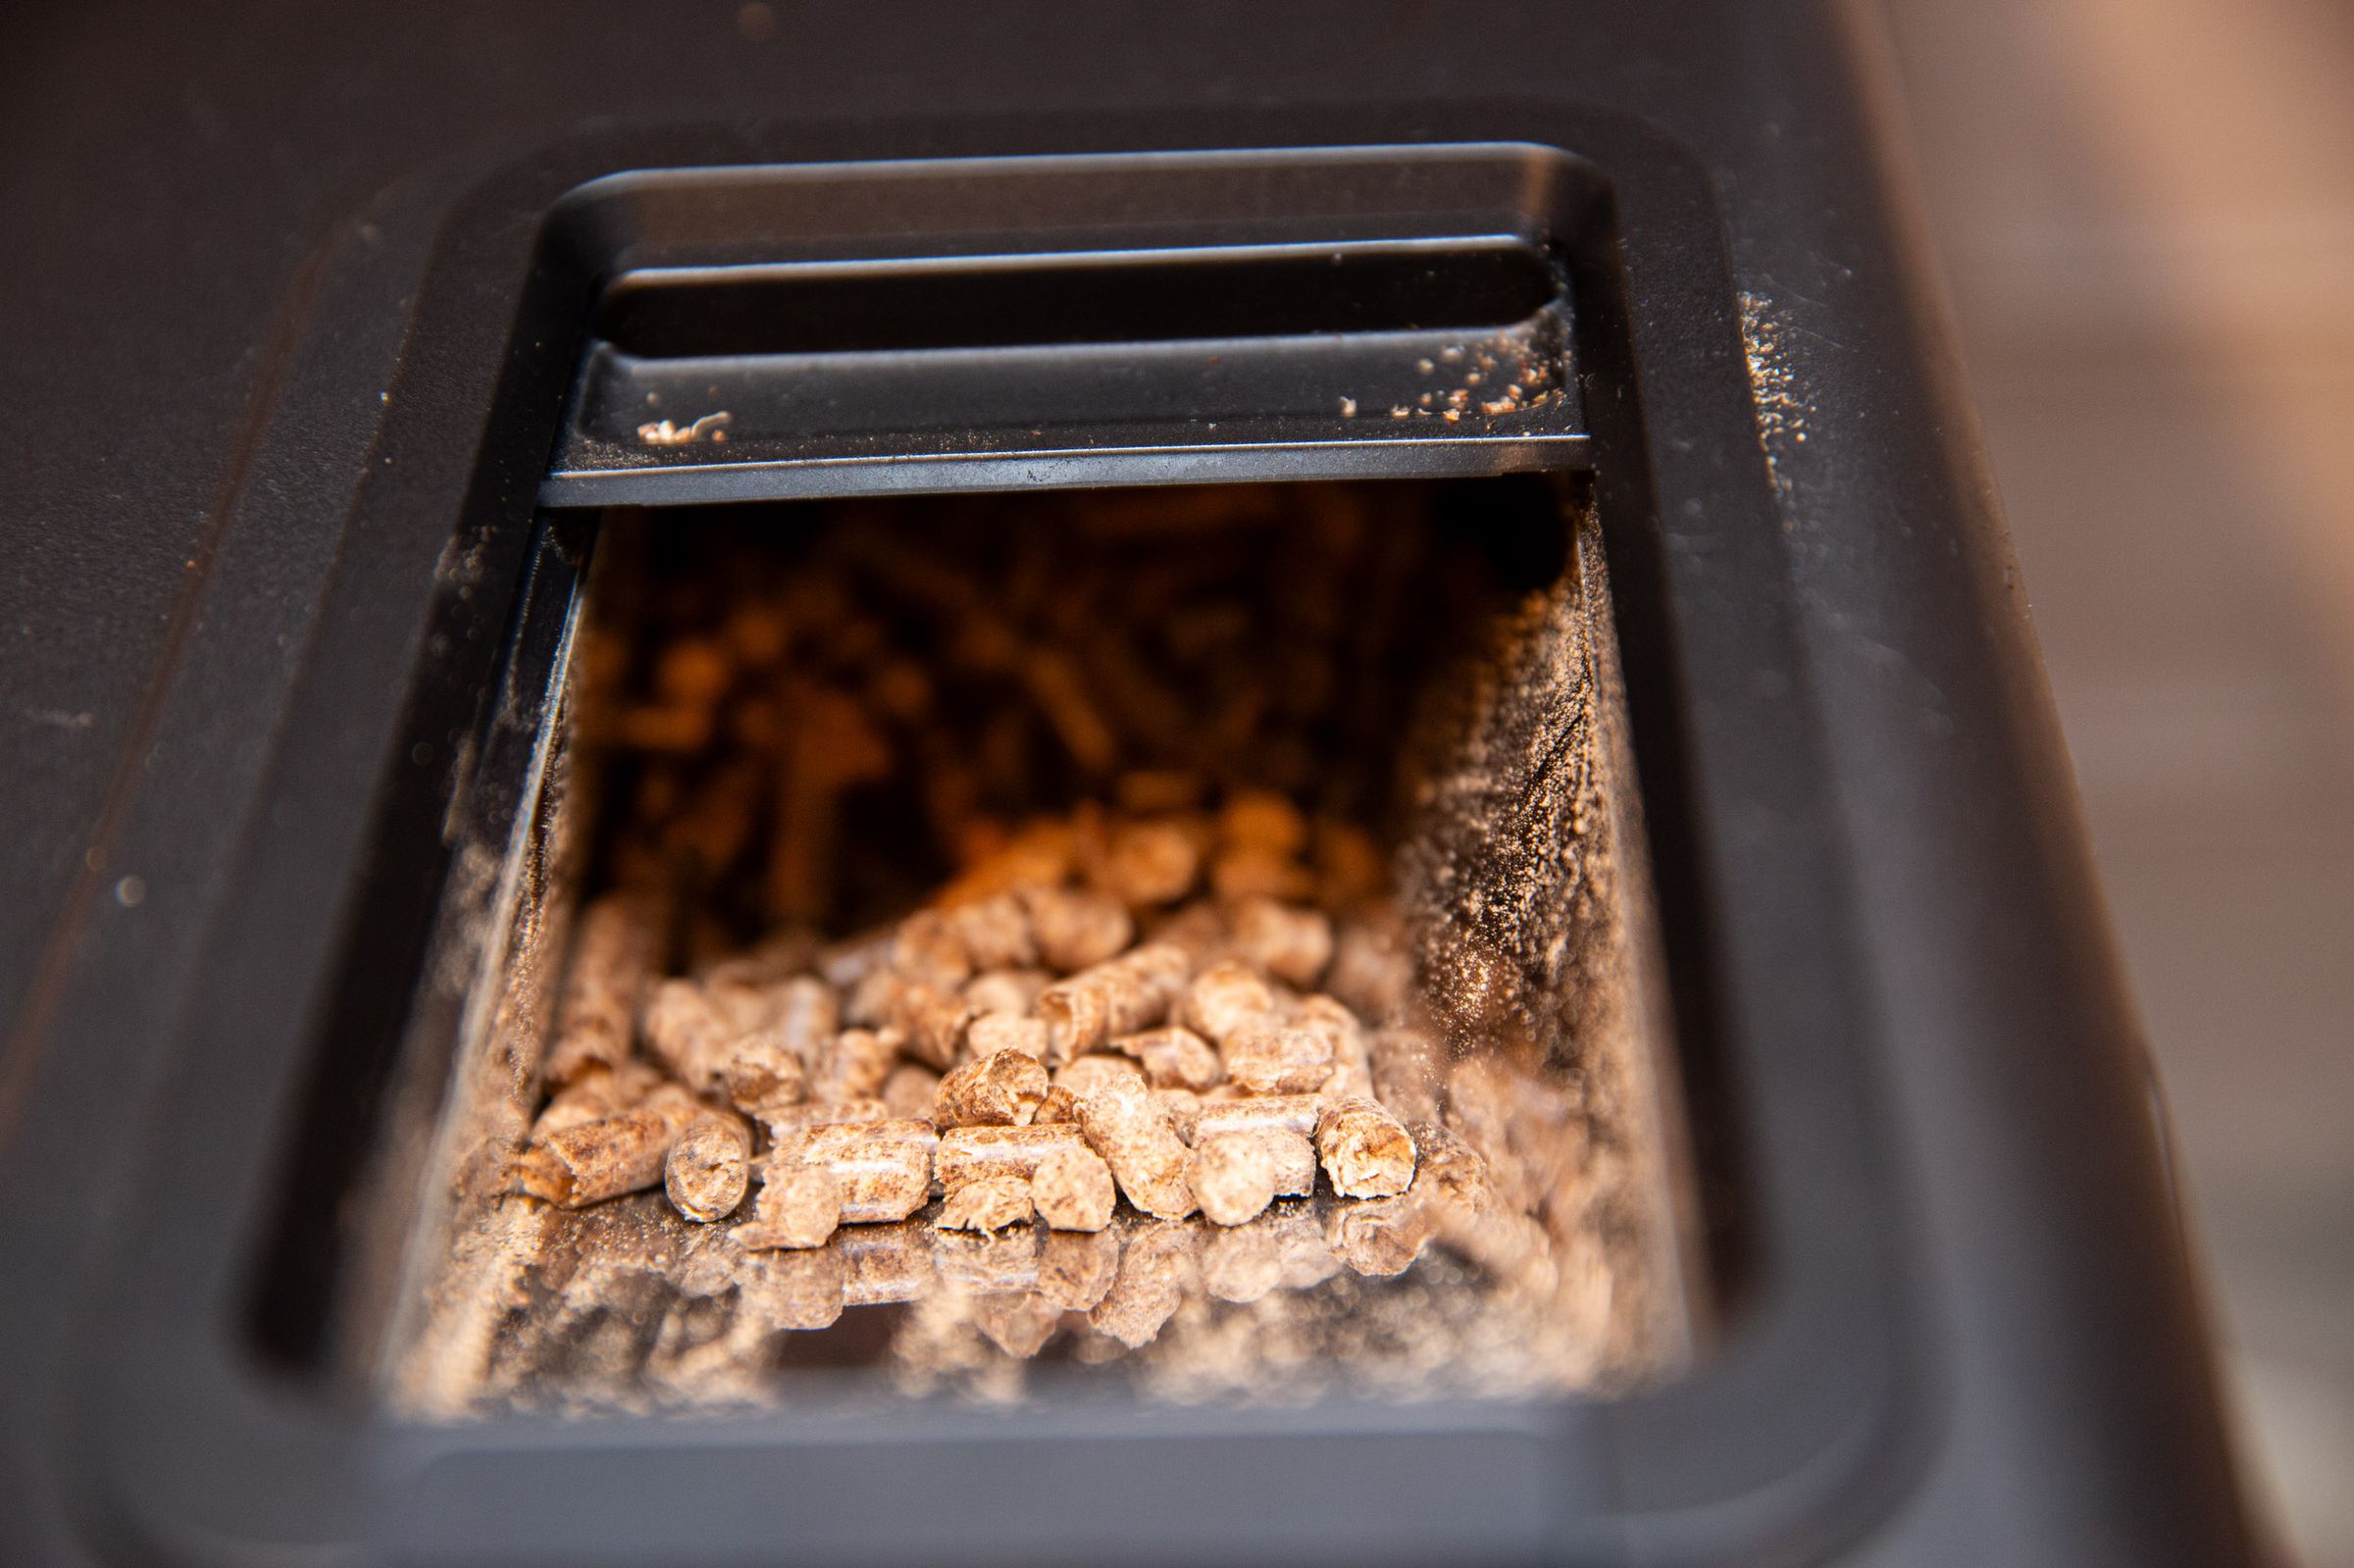 <em>Wood pellets go in the top of the smoker. A bag of wood pellets from Kona comes with it. GE Appliances says you can use any pellets designed for pellet grills or smokers.</em> 